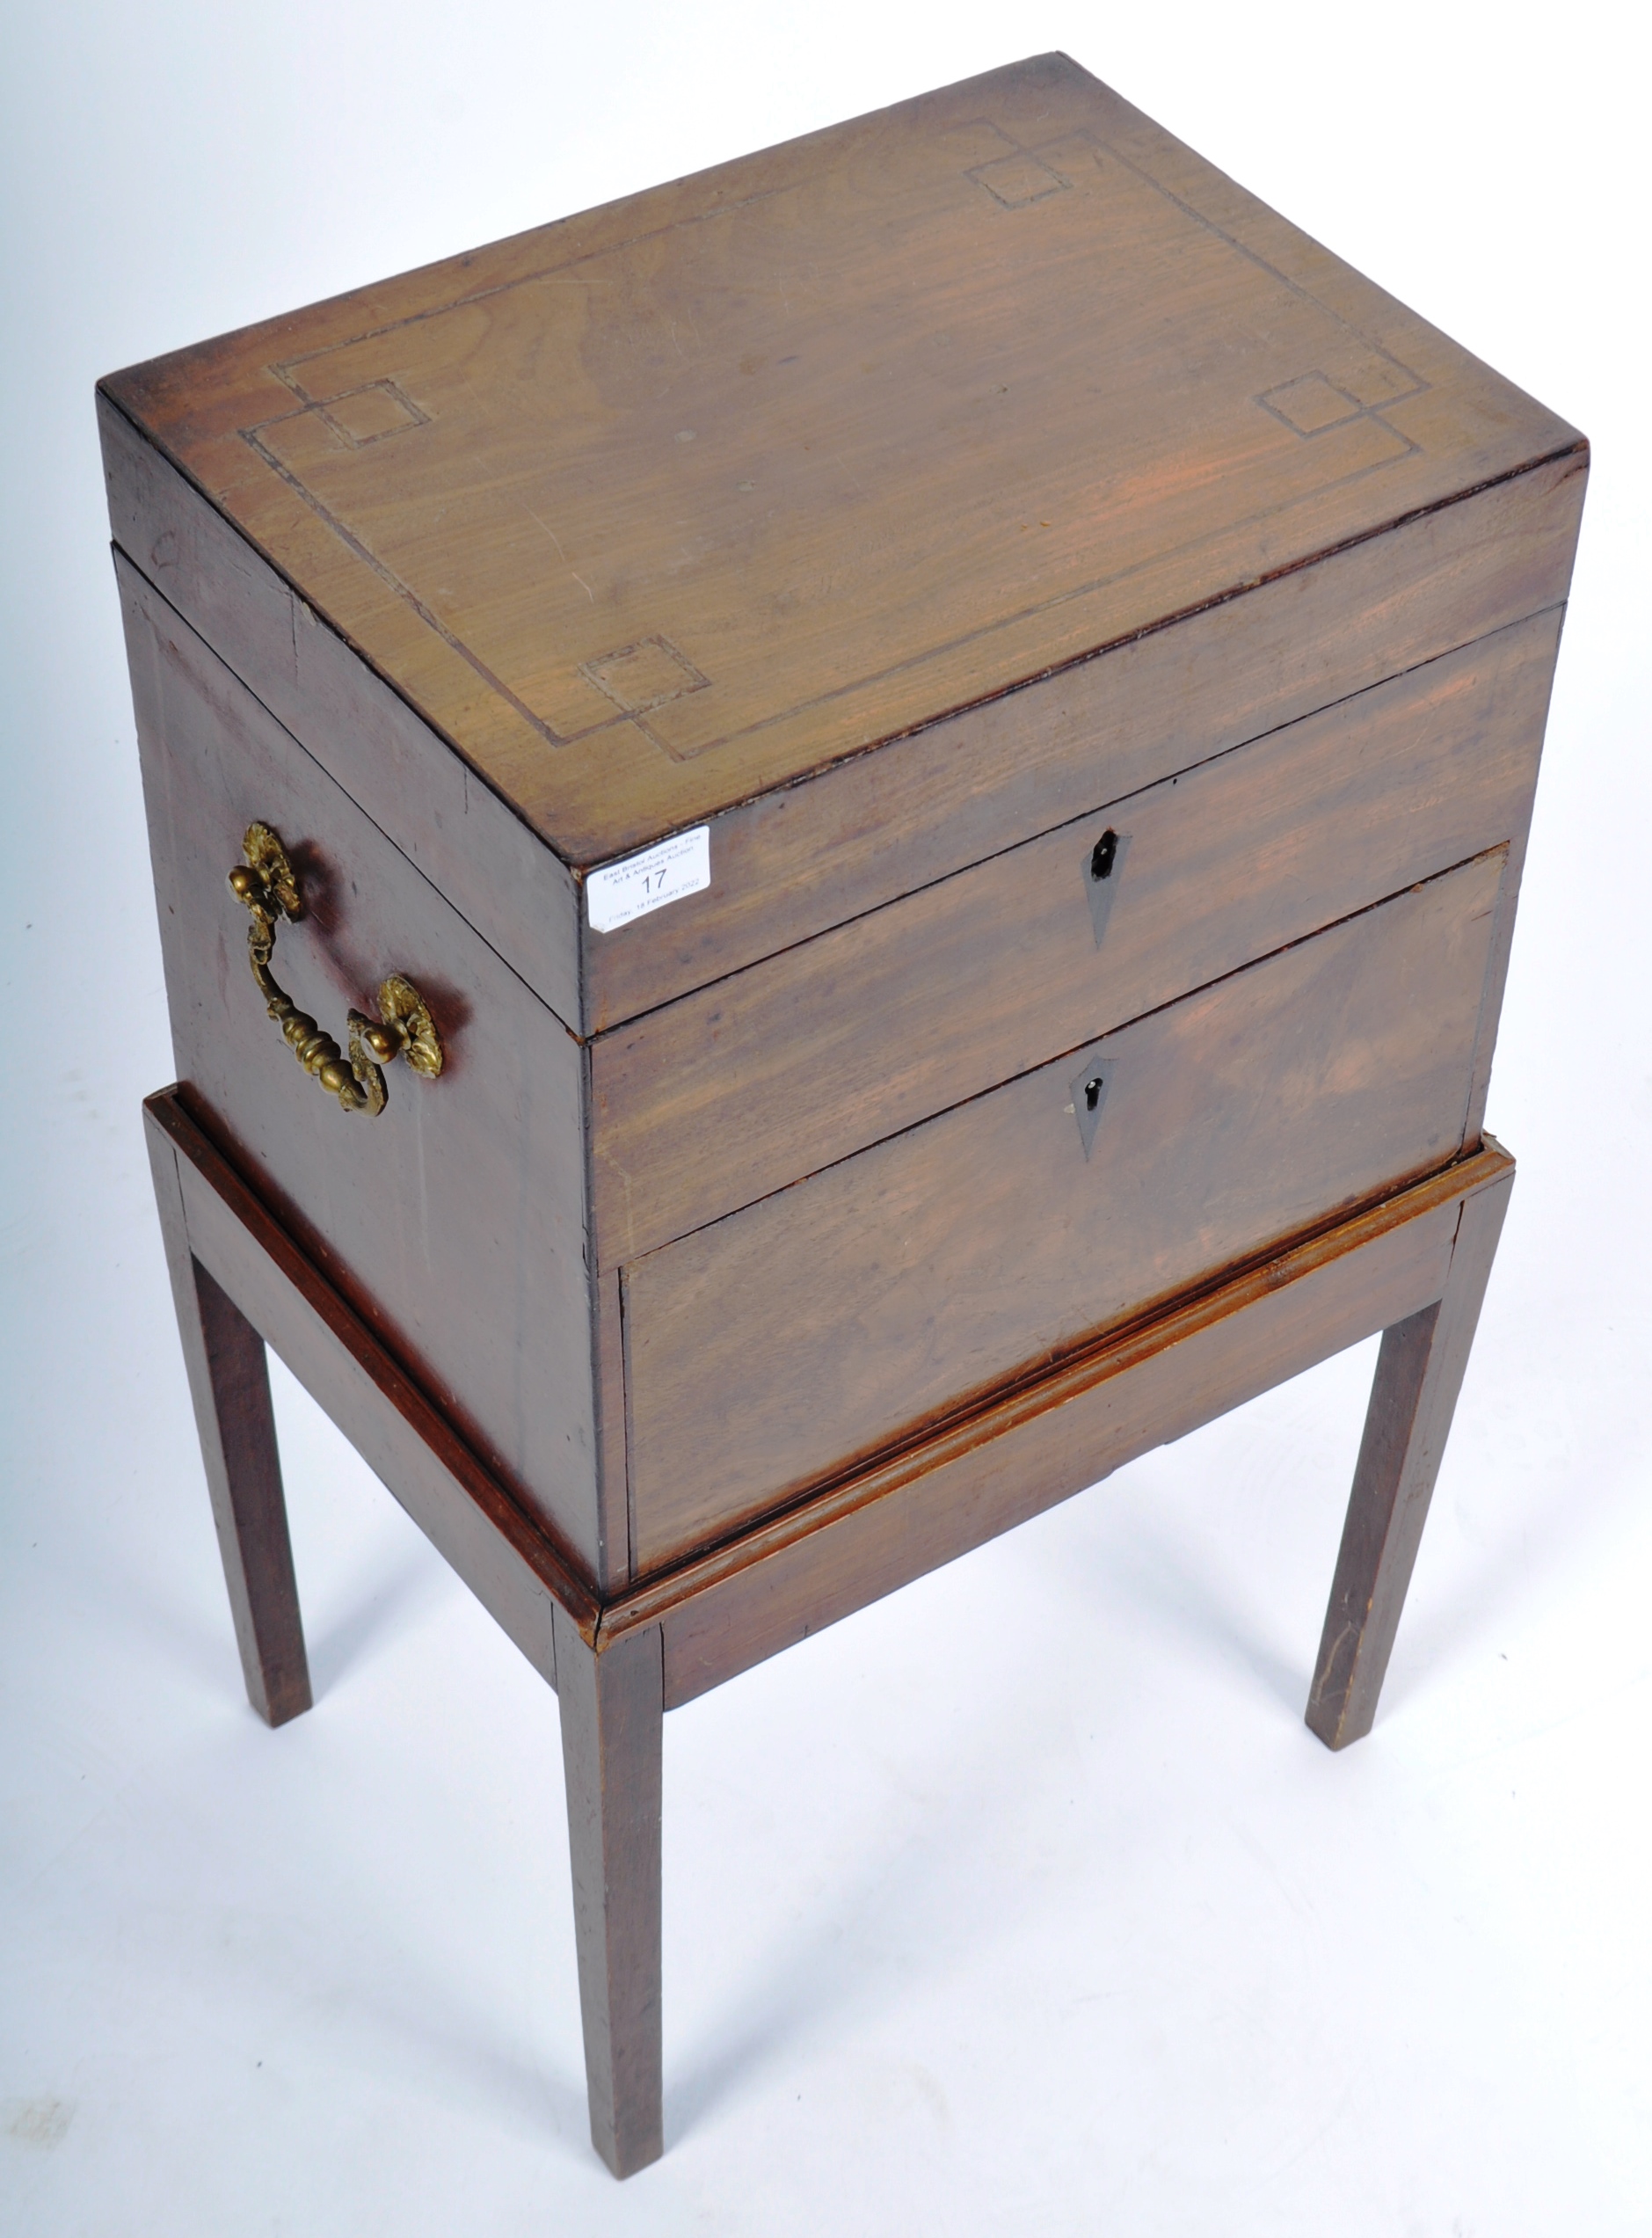 EARLY 19TH CENTURY REGENCY MAHOGANY WORK BOX ON STAND - Image 2 of 5